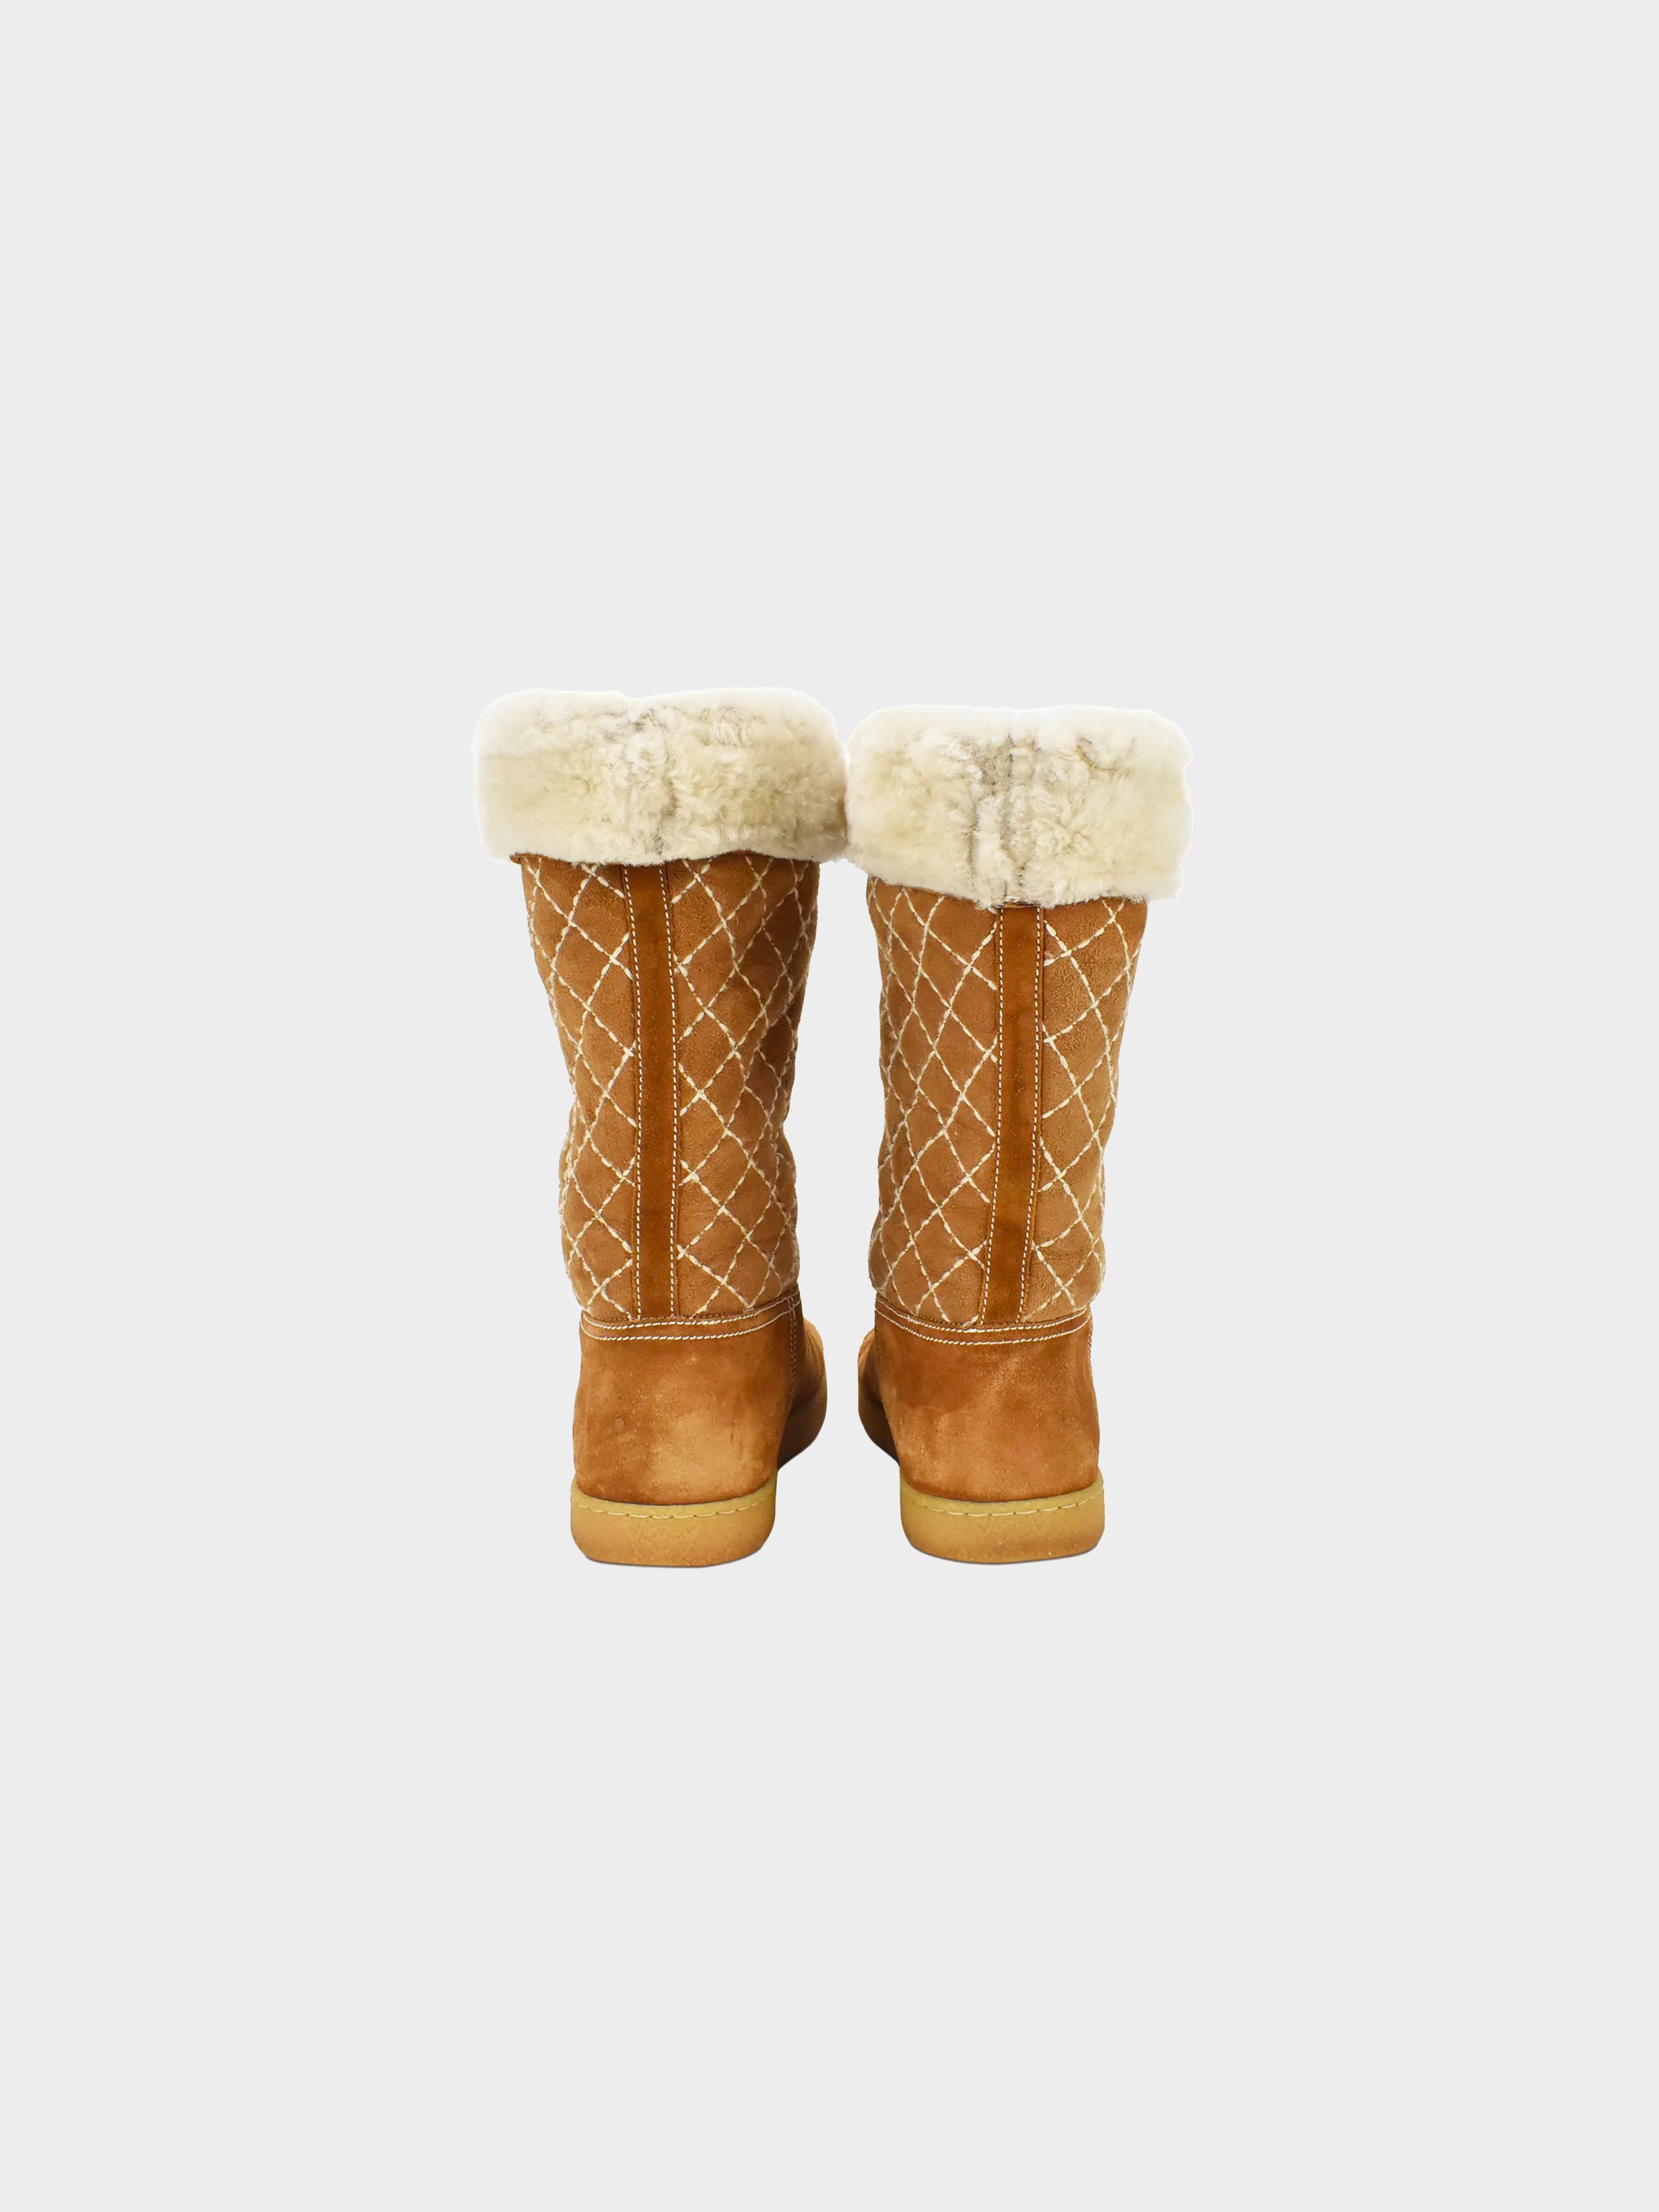 Chanel 2000s Shearling Logo Boots